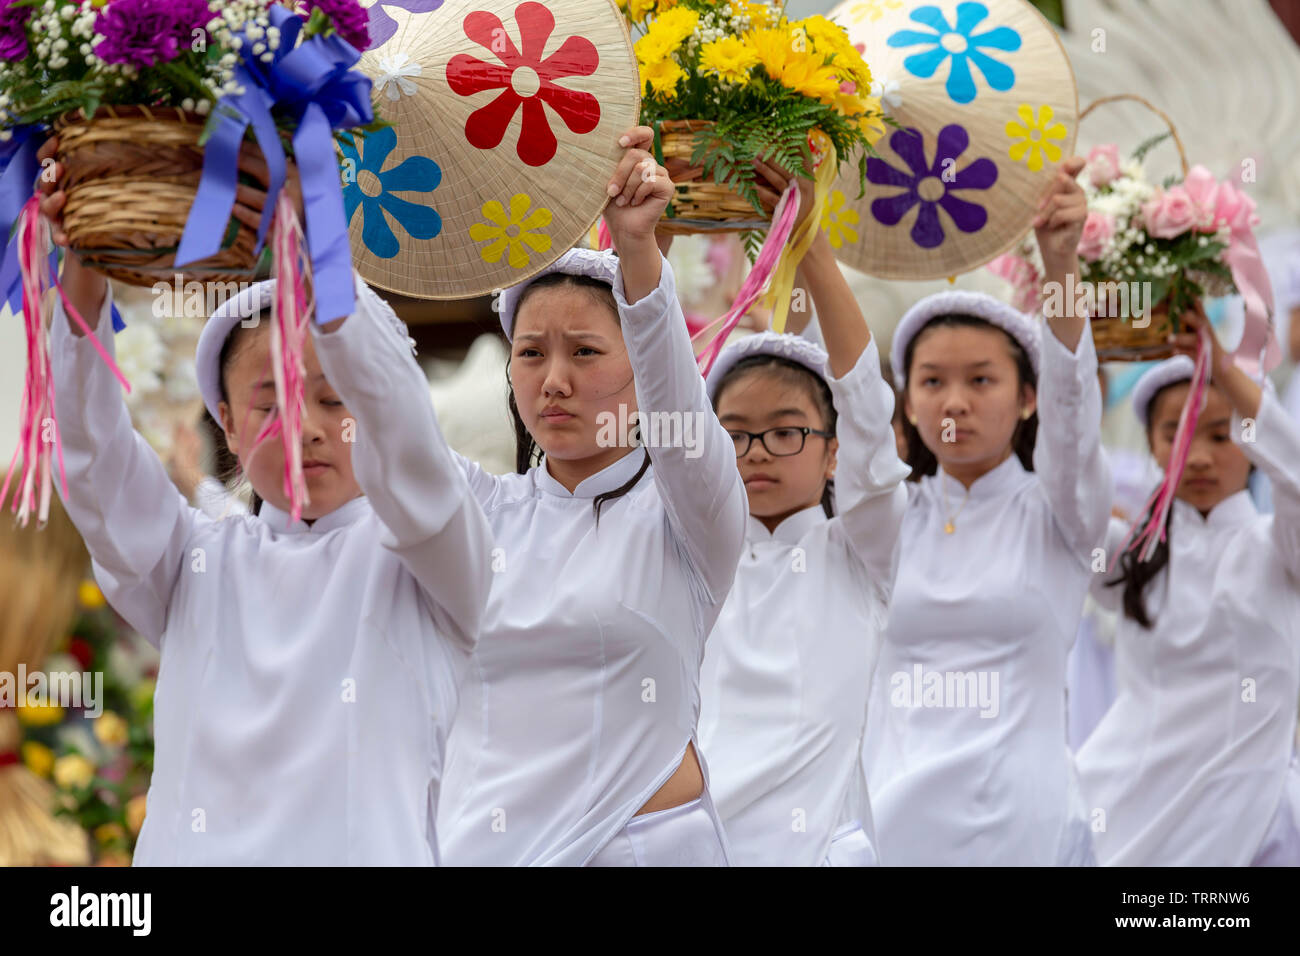 New Orleans, Louisiana - Mother's Day is celebrated with a procession, and flower dance, and mass at Our Lady of Lavang Mission. The church serves Vie Stock Photo